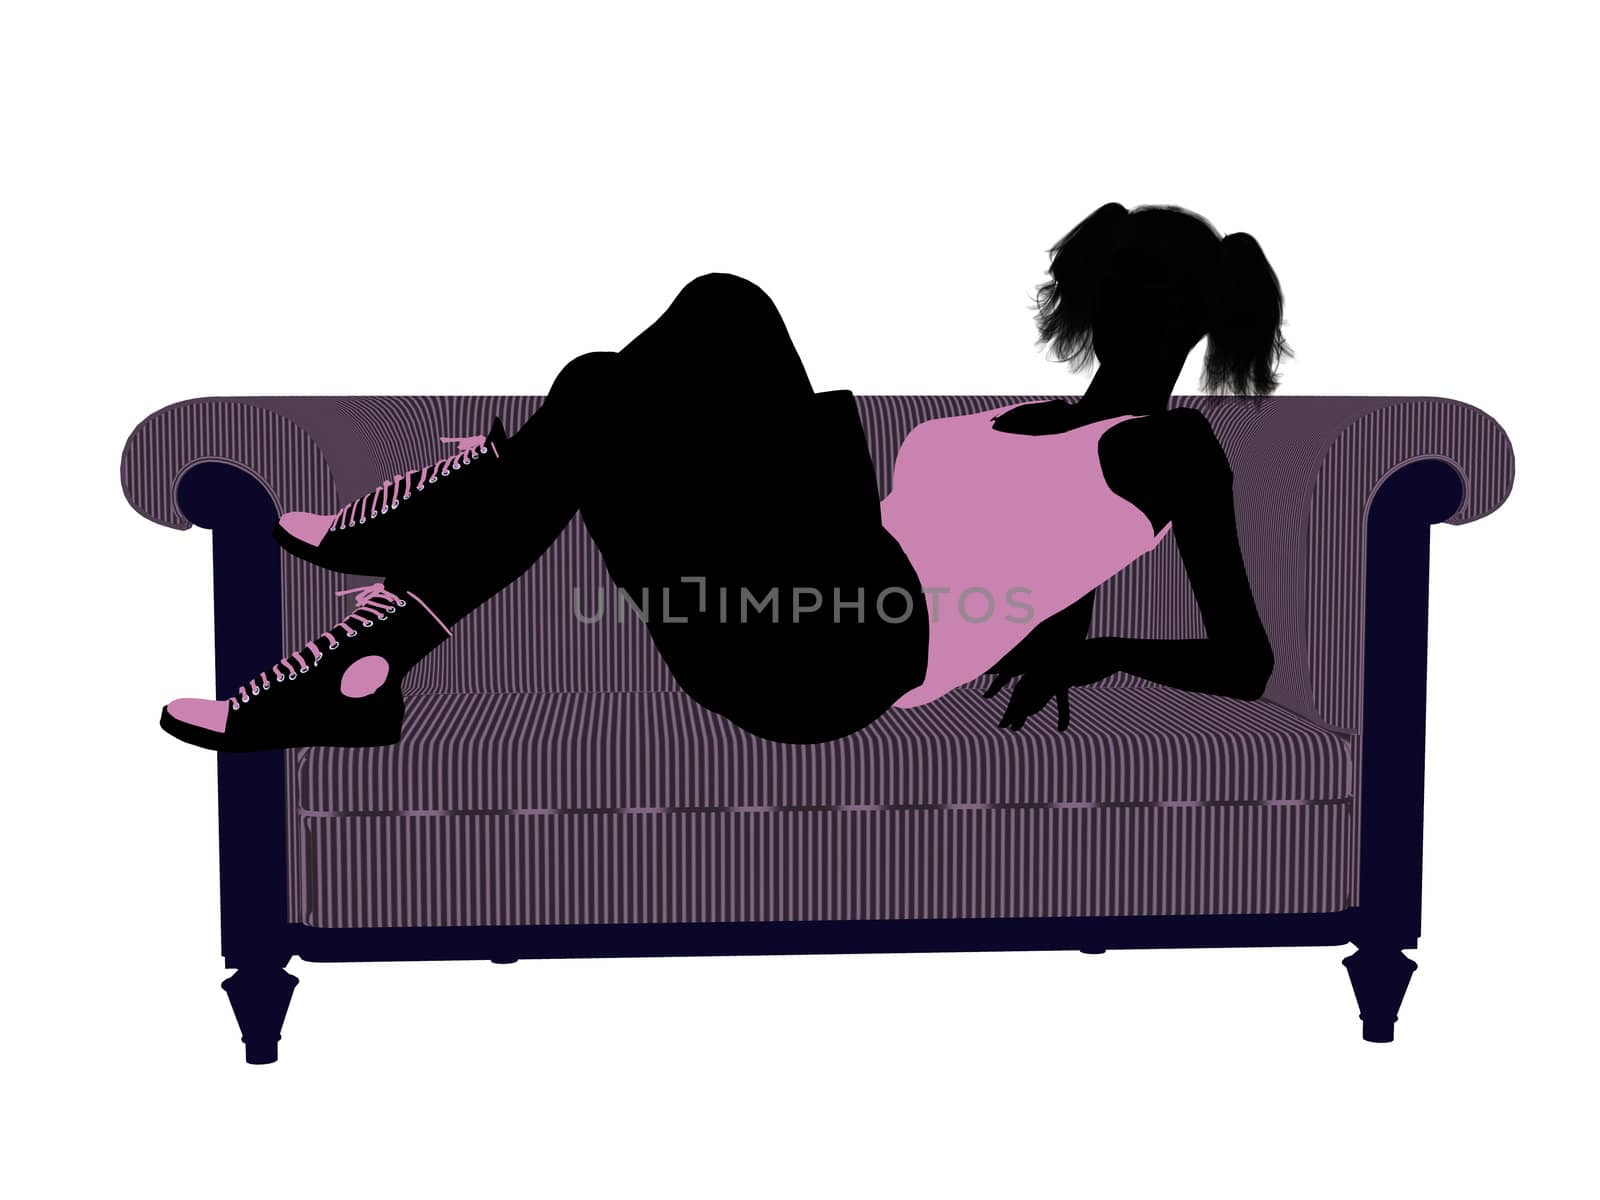 Female Athlete Lying On A Sofa Illustration Silhouette by kathygold